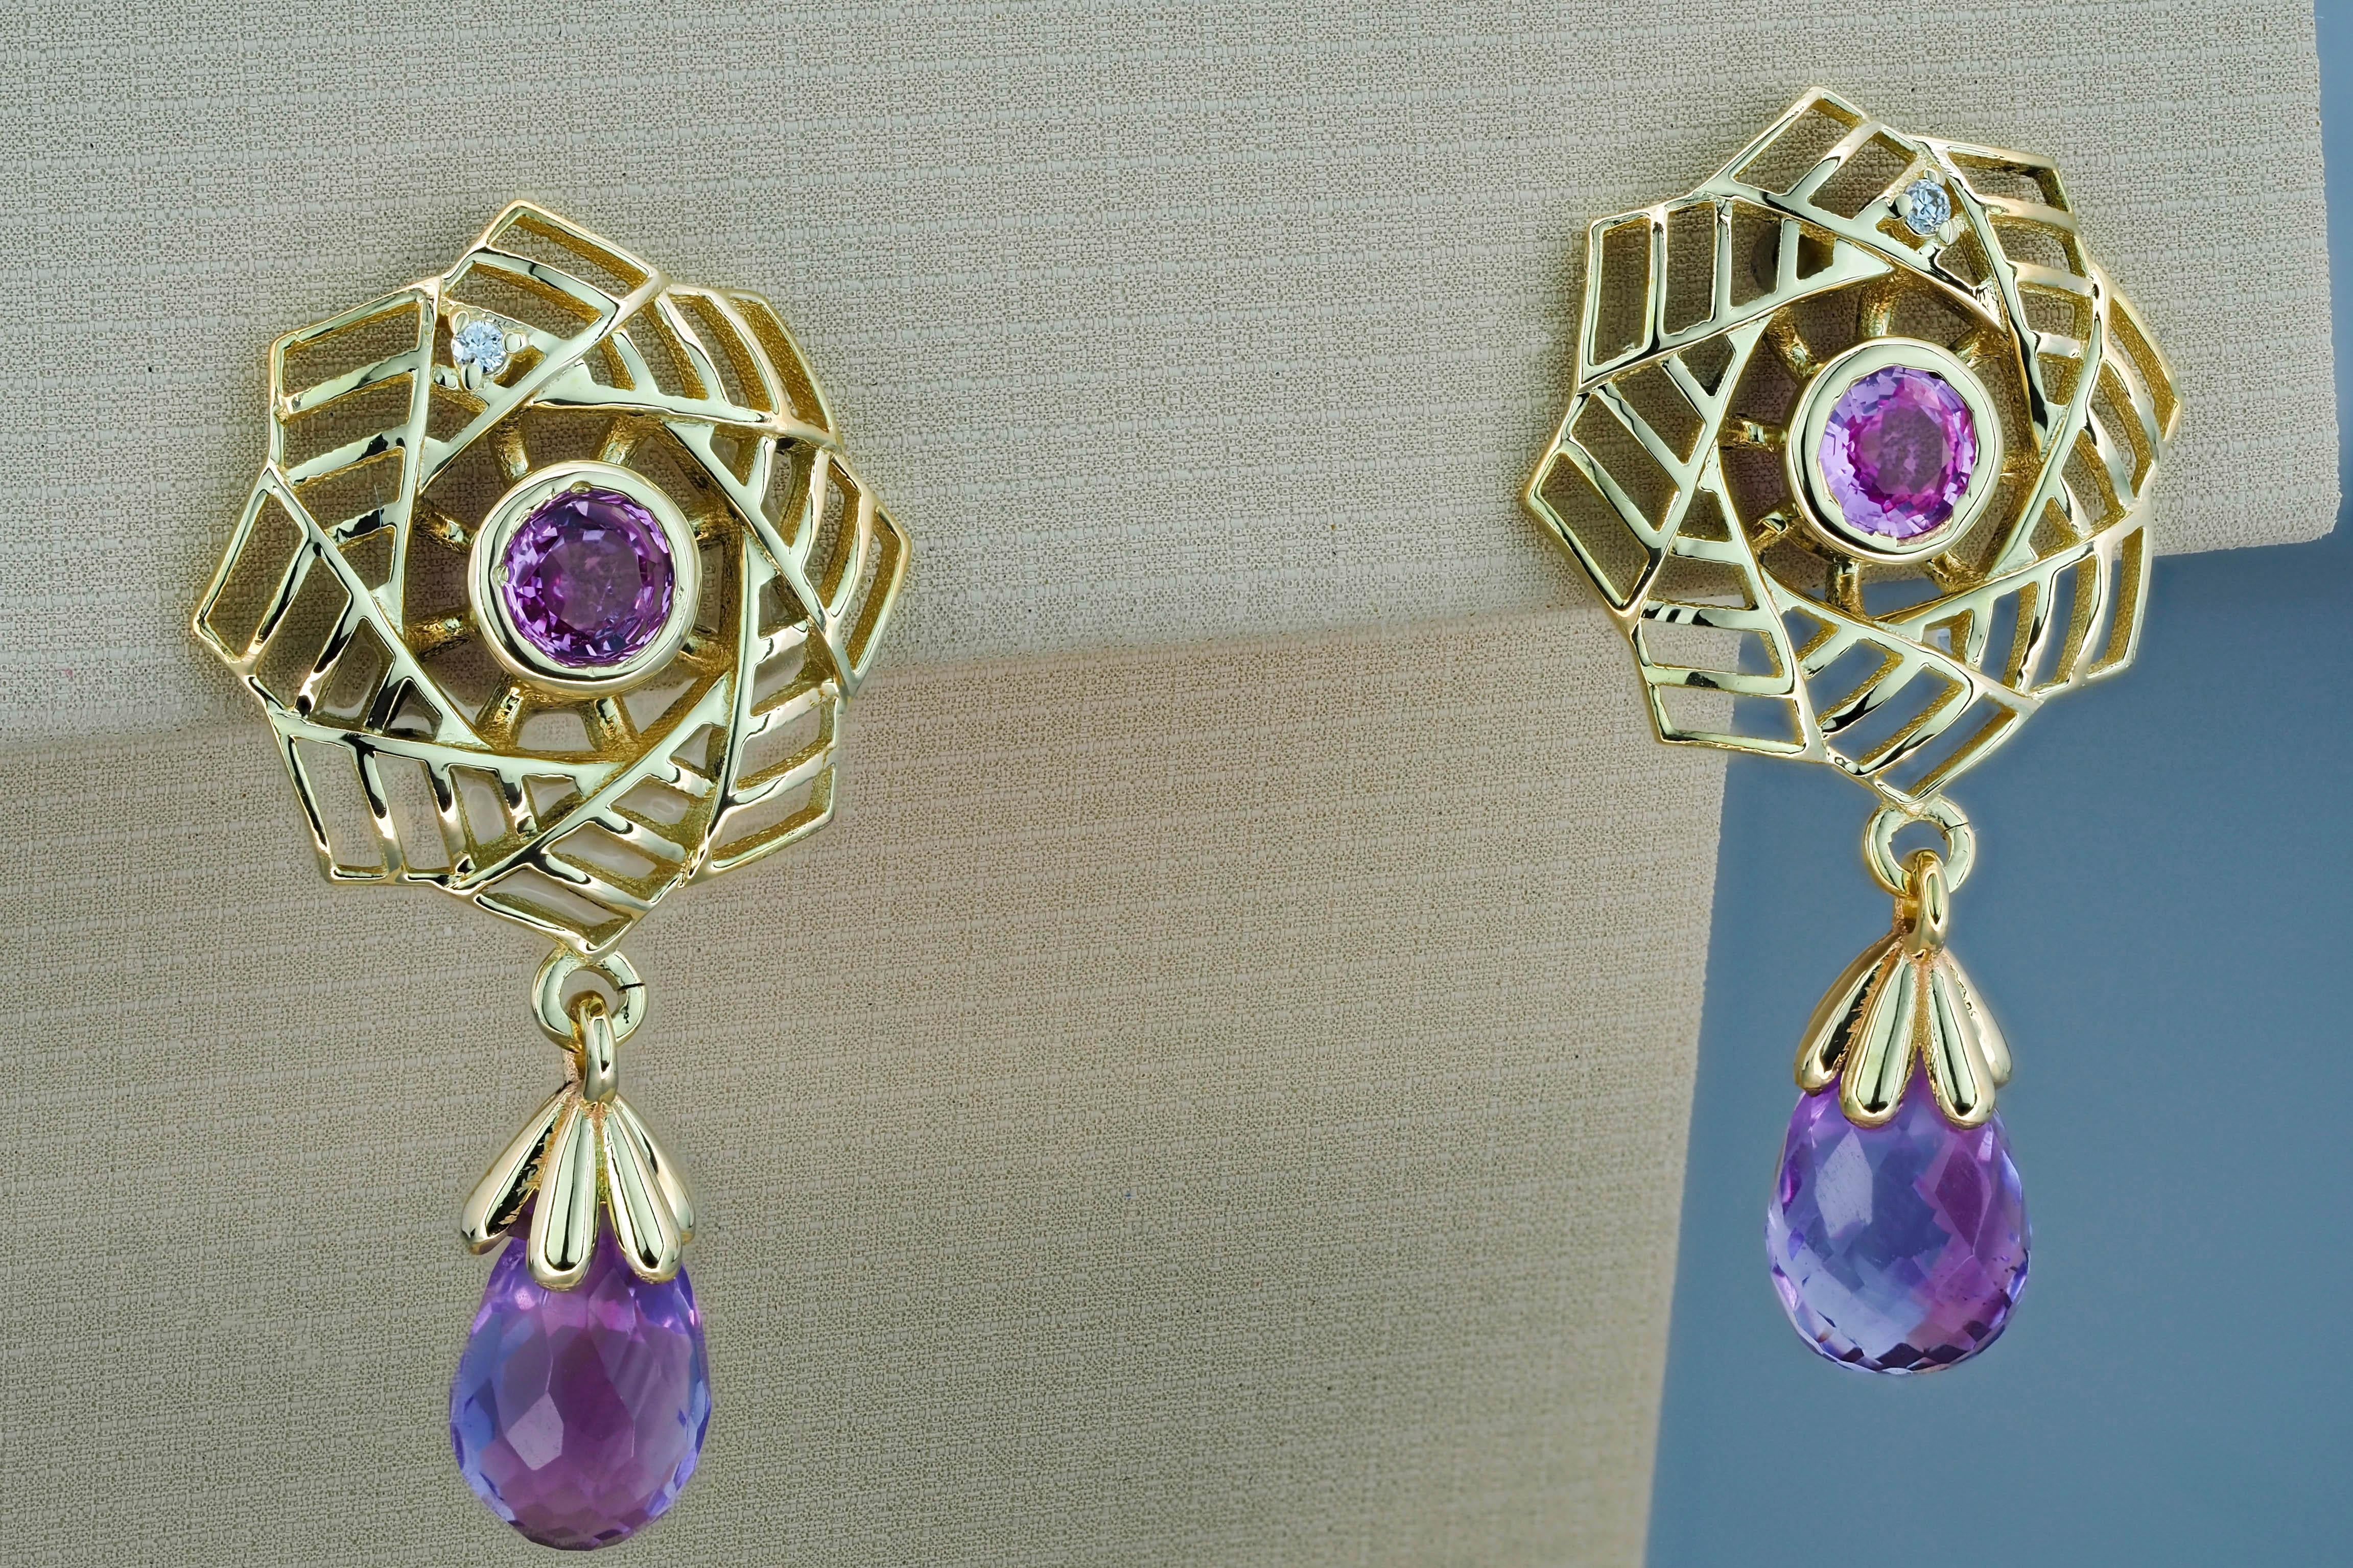 14k gold earrings with amethyst, sapphires and diamonds. Amethyst earrings in 14k gold. Pink sapphire earrings in 14k gold. 

Material: 14k gold
Weight: 2.80 g.
Earrings size: 25 x 14 mm
Amethyst:
2 pieces, lavender - violet - color, briolette cut,